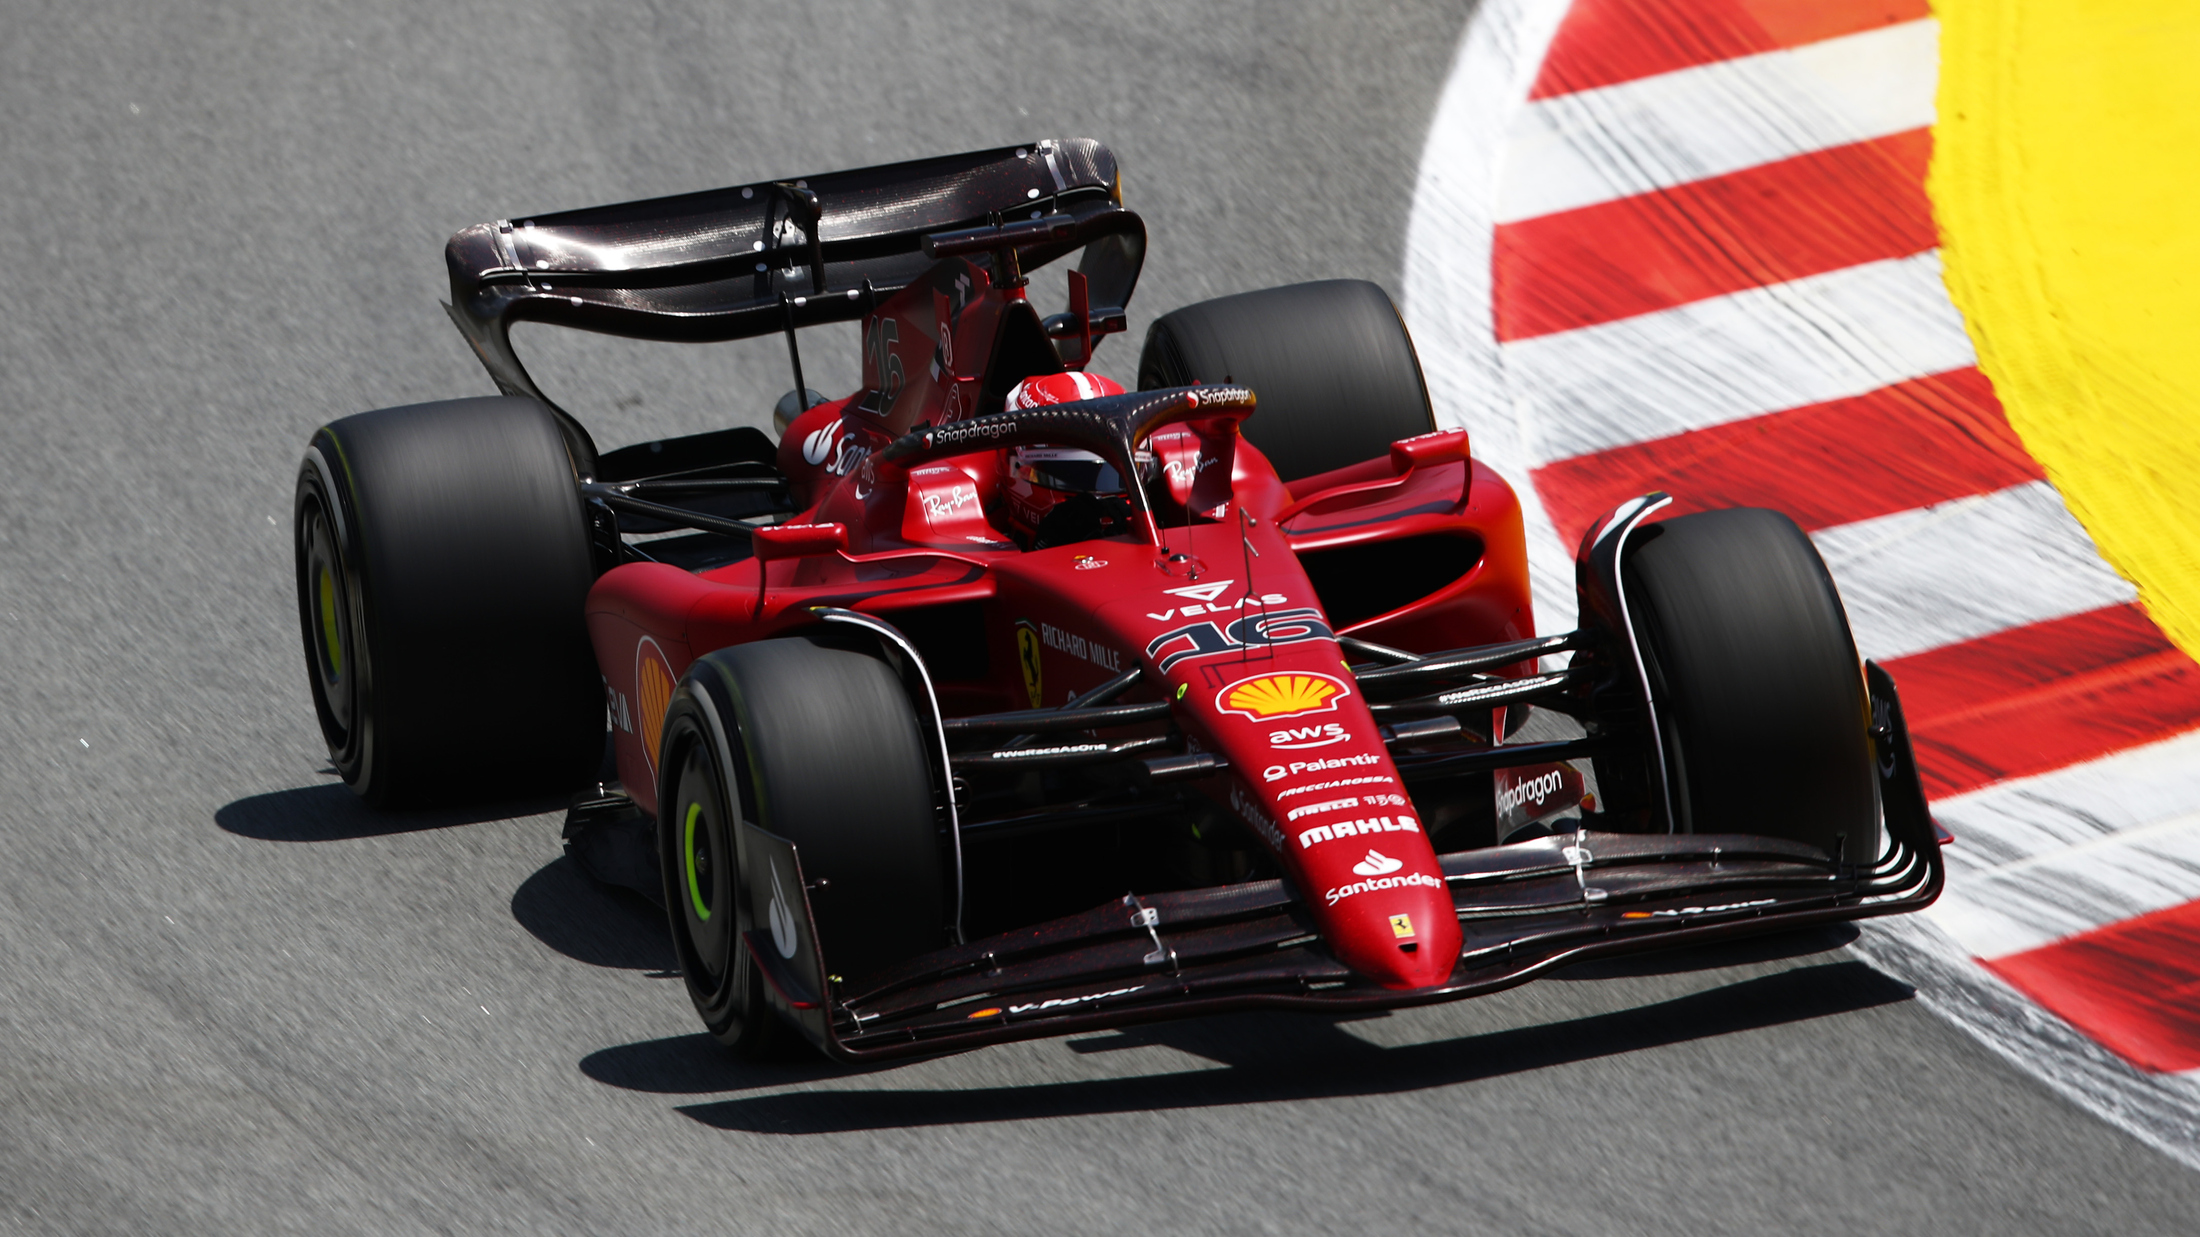 2022 Spanish Grand Prix FP1 report and highlights: Leclerc leads Sainz and Verstappen as Ferrari starts Spanish GP weekend on the front foot